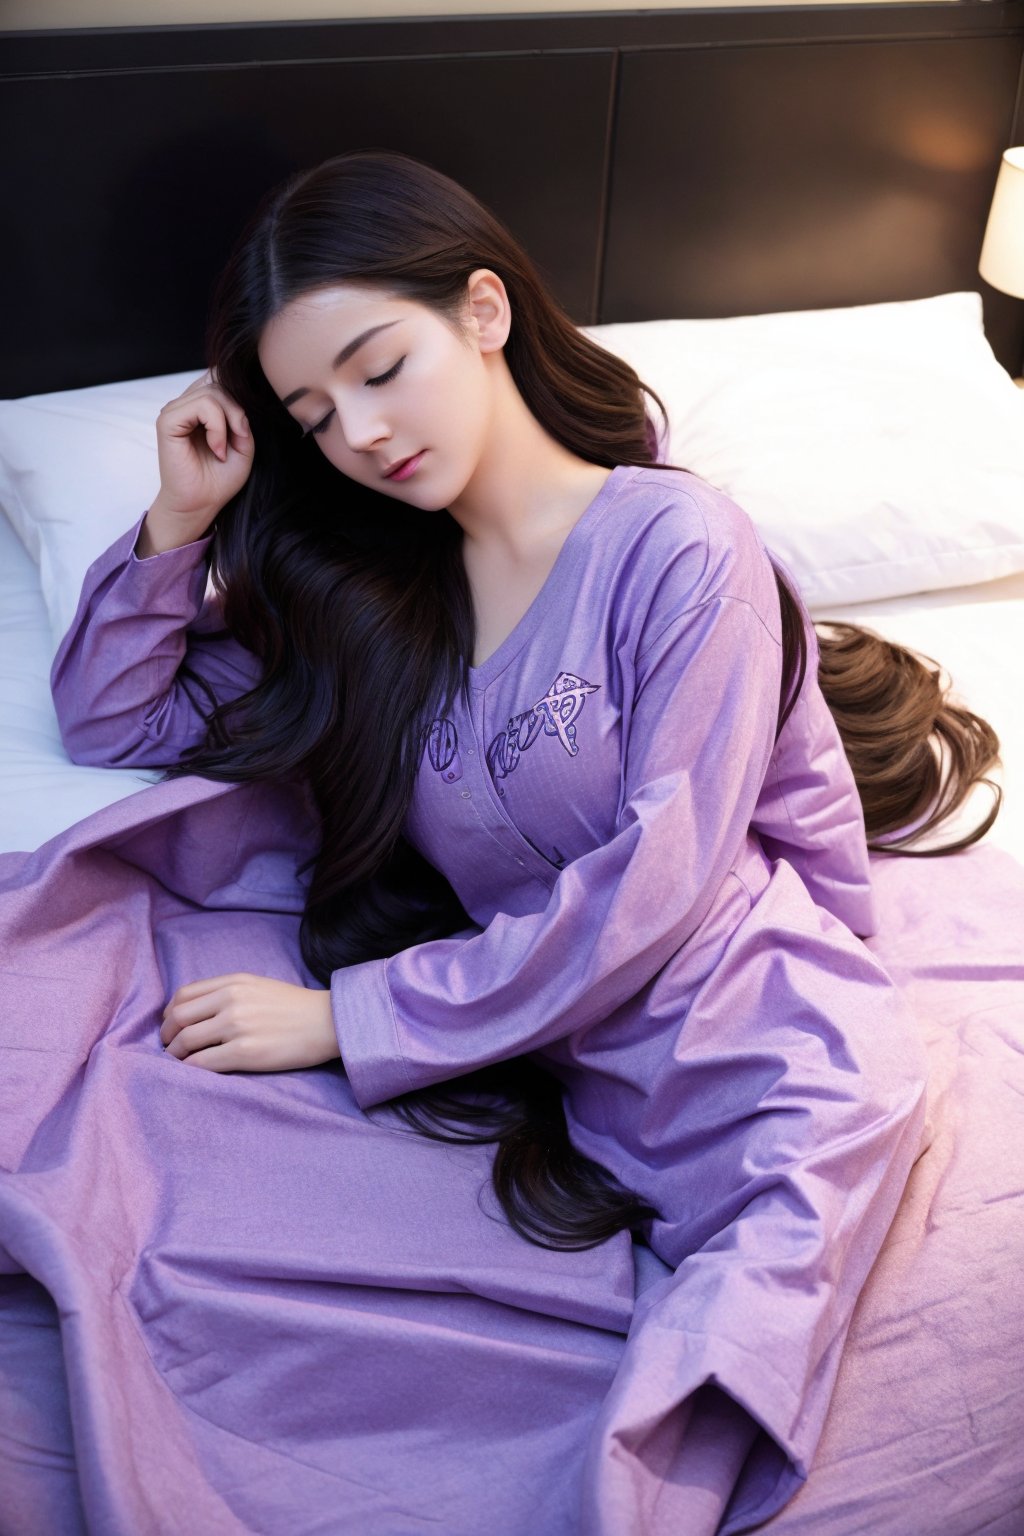 a cute girl , ((sleeping on a bed)), purple pastel pajamas, full body potrait of a photorealistic beautiful woman, complex, 8k resolution, fractal isometrics details bioluminescence, hypereallistic cover photo awesome full color, hand drawn, bright, gritty, realistic, davinci, erte .12k, intricate. hit definition , cinematic, mix of bold dark lines and loose lines, bold lines, on paper , real life human

